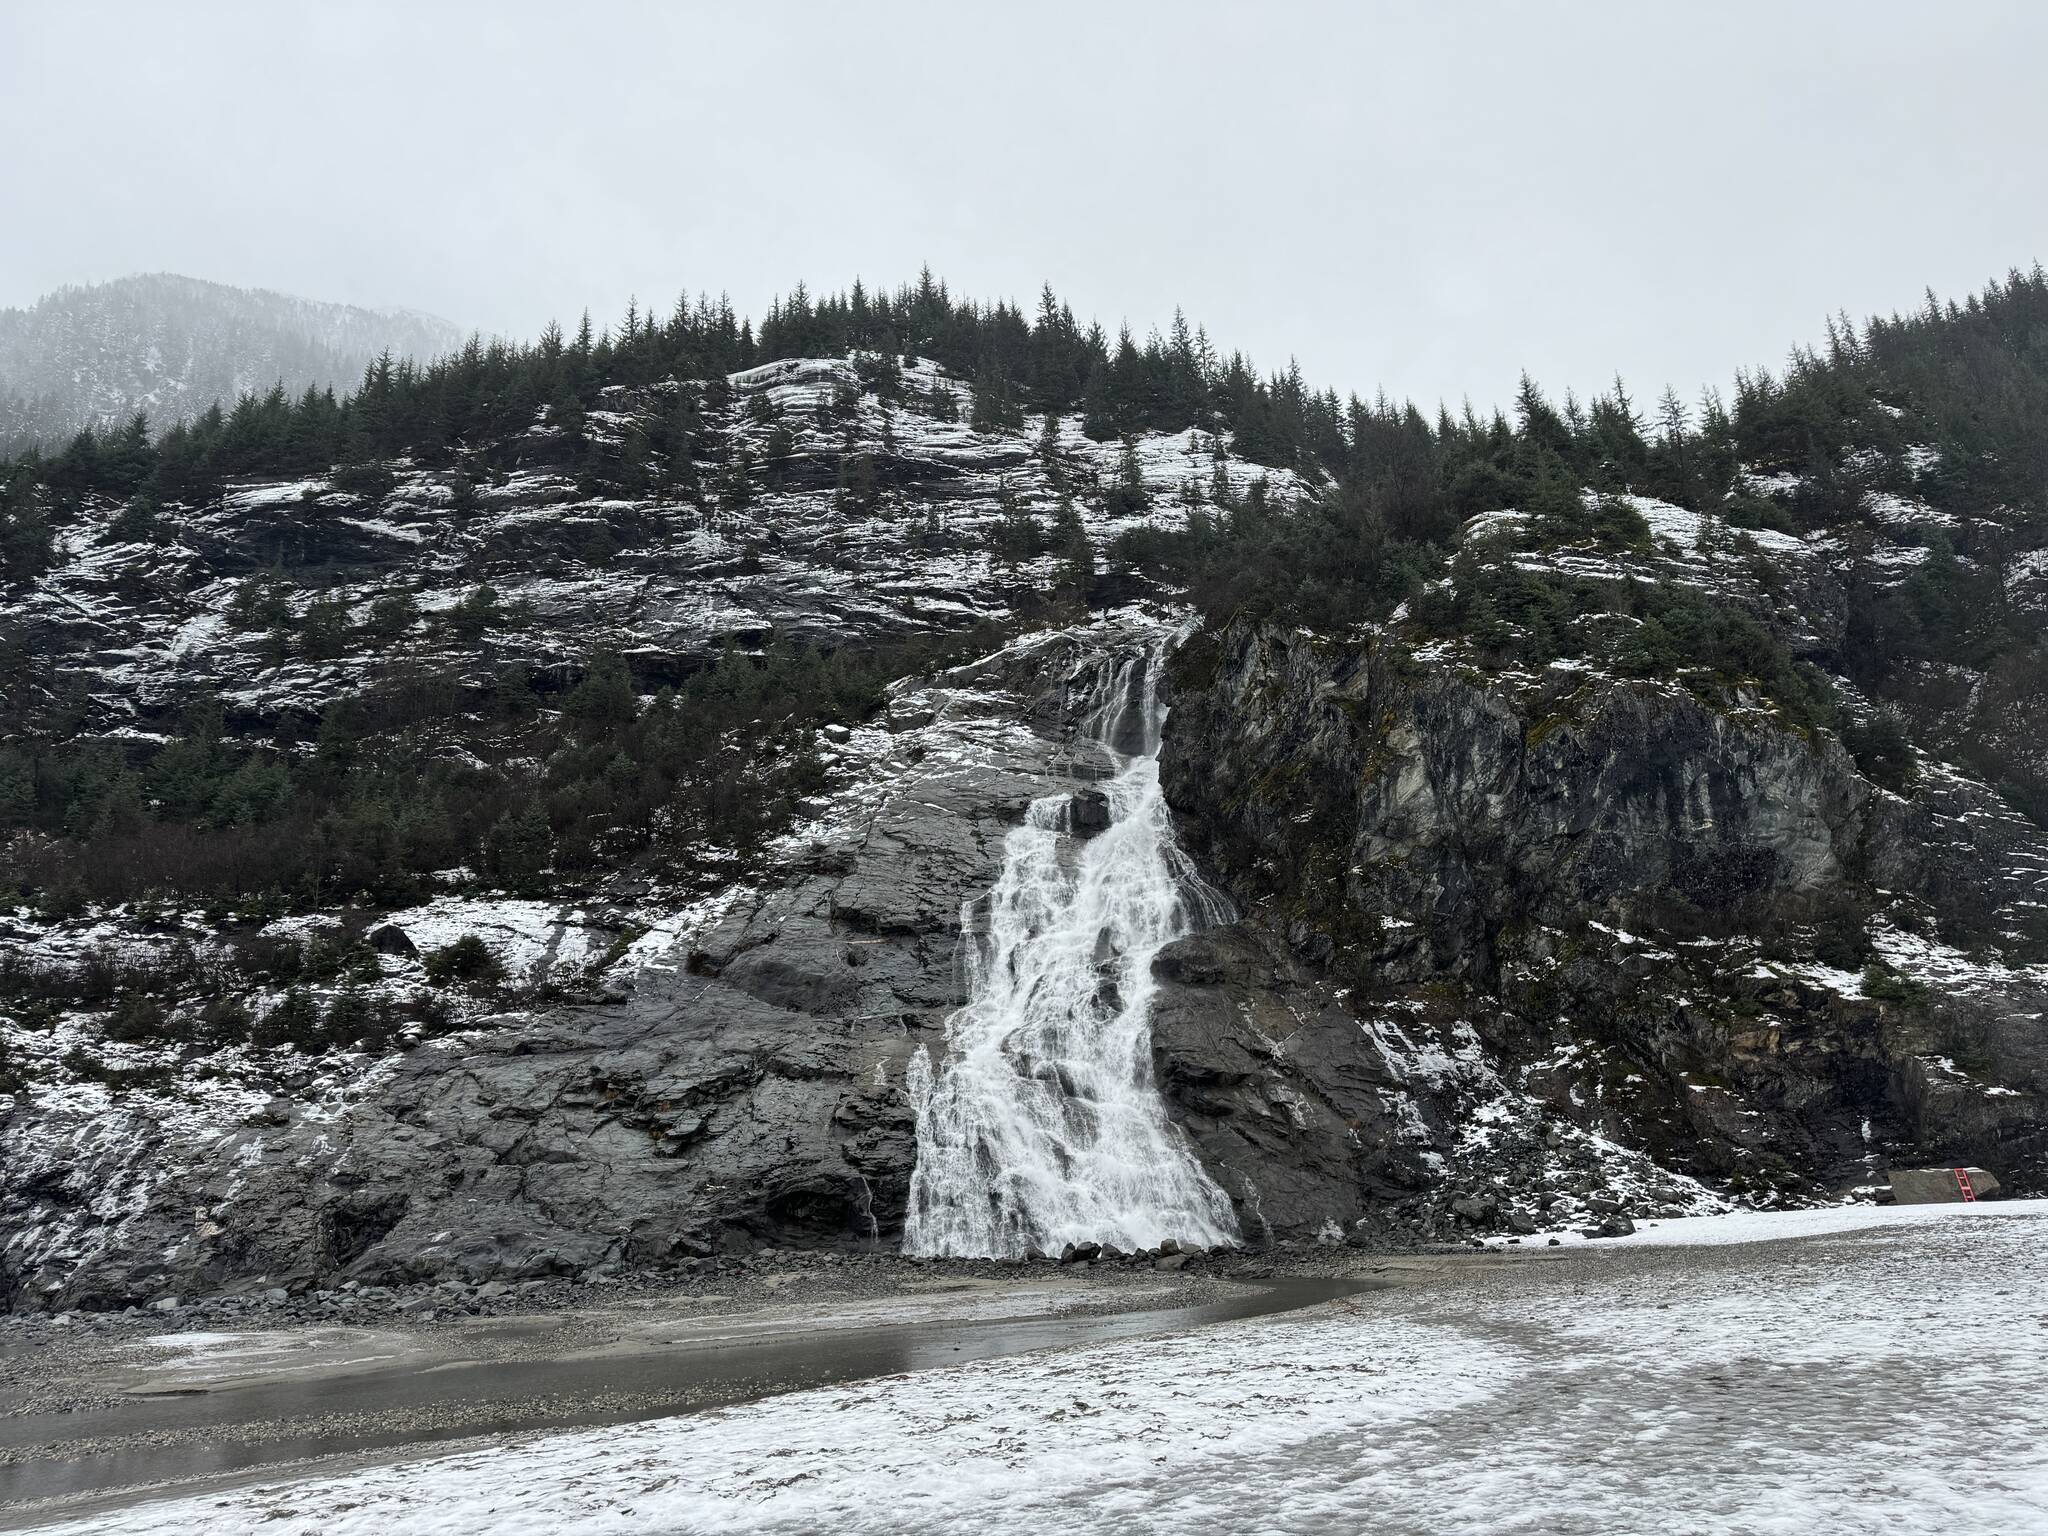 A waterfall continues to flow in full force along the Nugget Falls Trail on Dec. 24. (Photo by Deana Barajas)